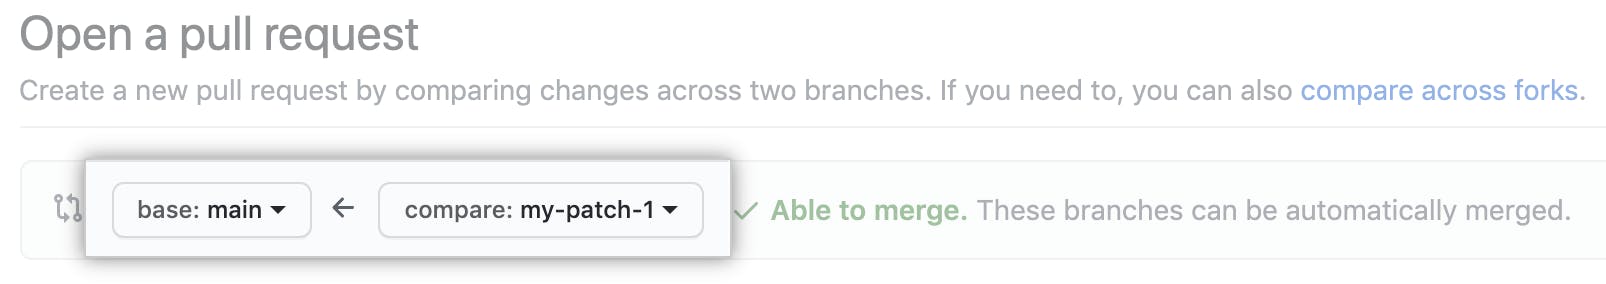 An image showing branches in a pull request on github